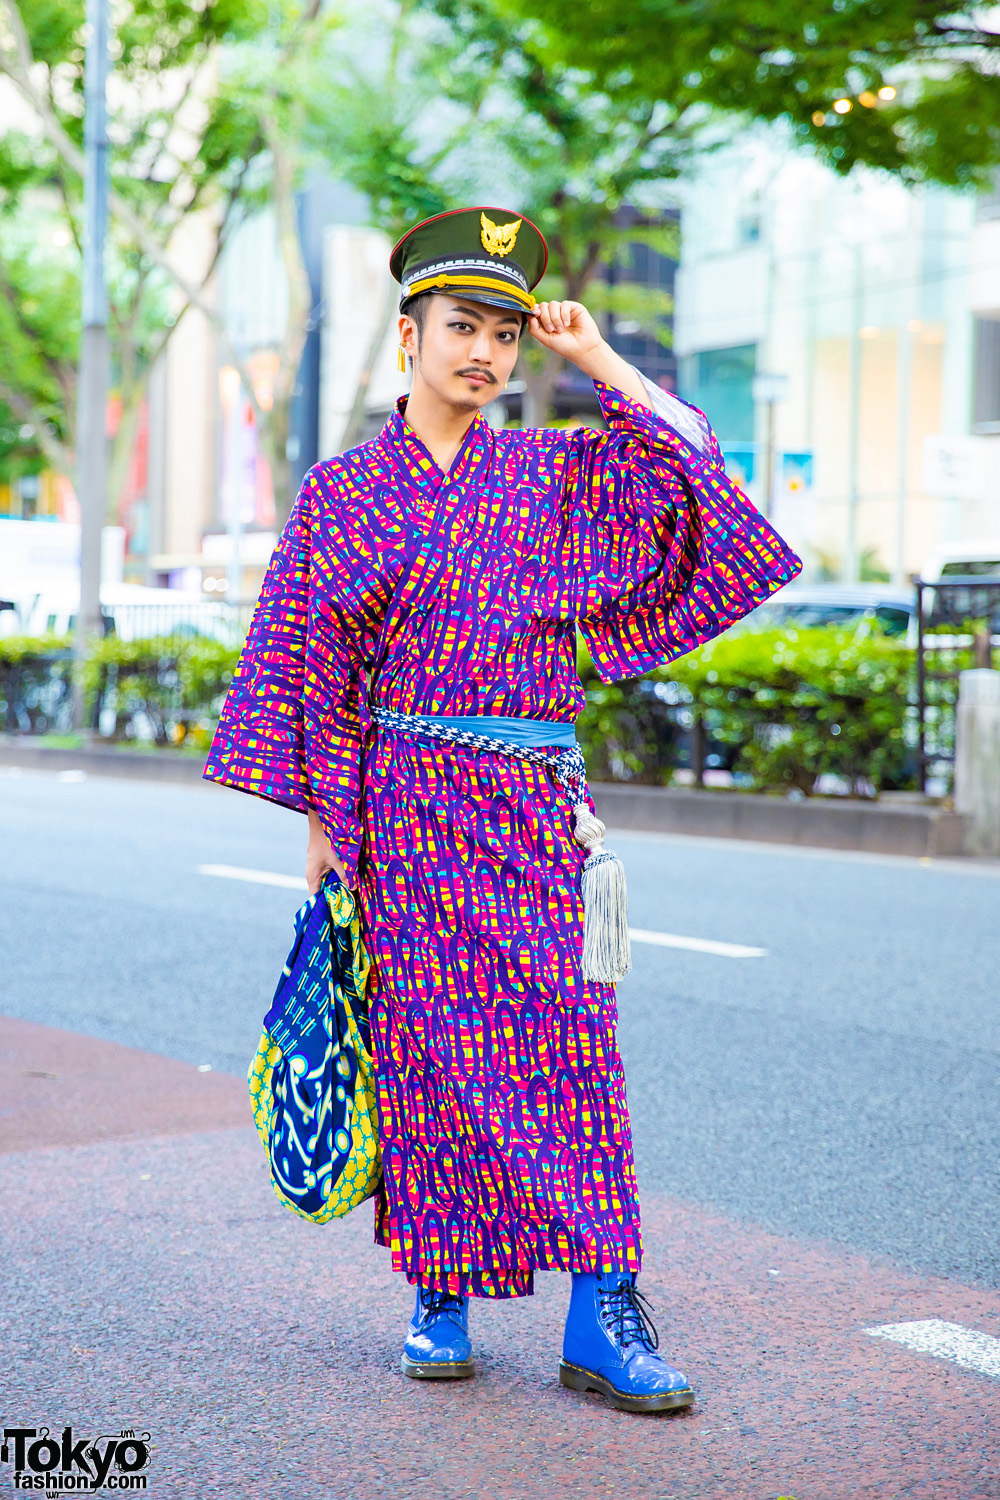 Japanese Musician in Robe Japonica Yukata, Military Hat & Dr. Martens